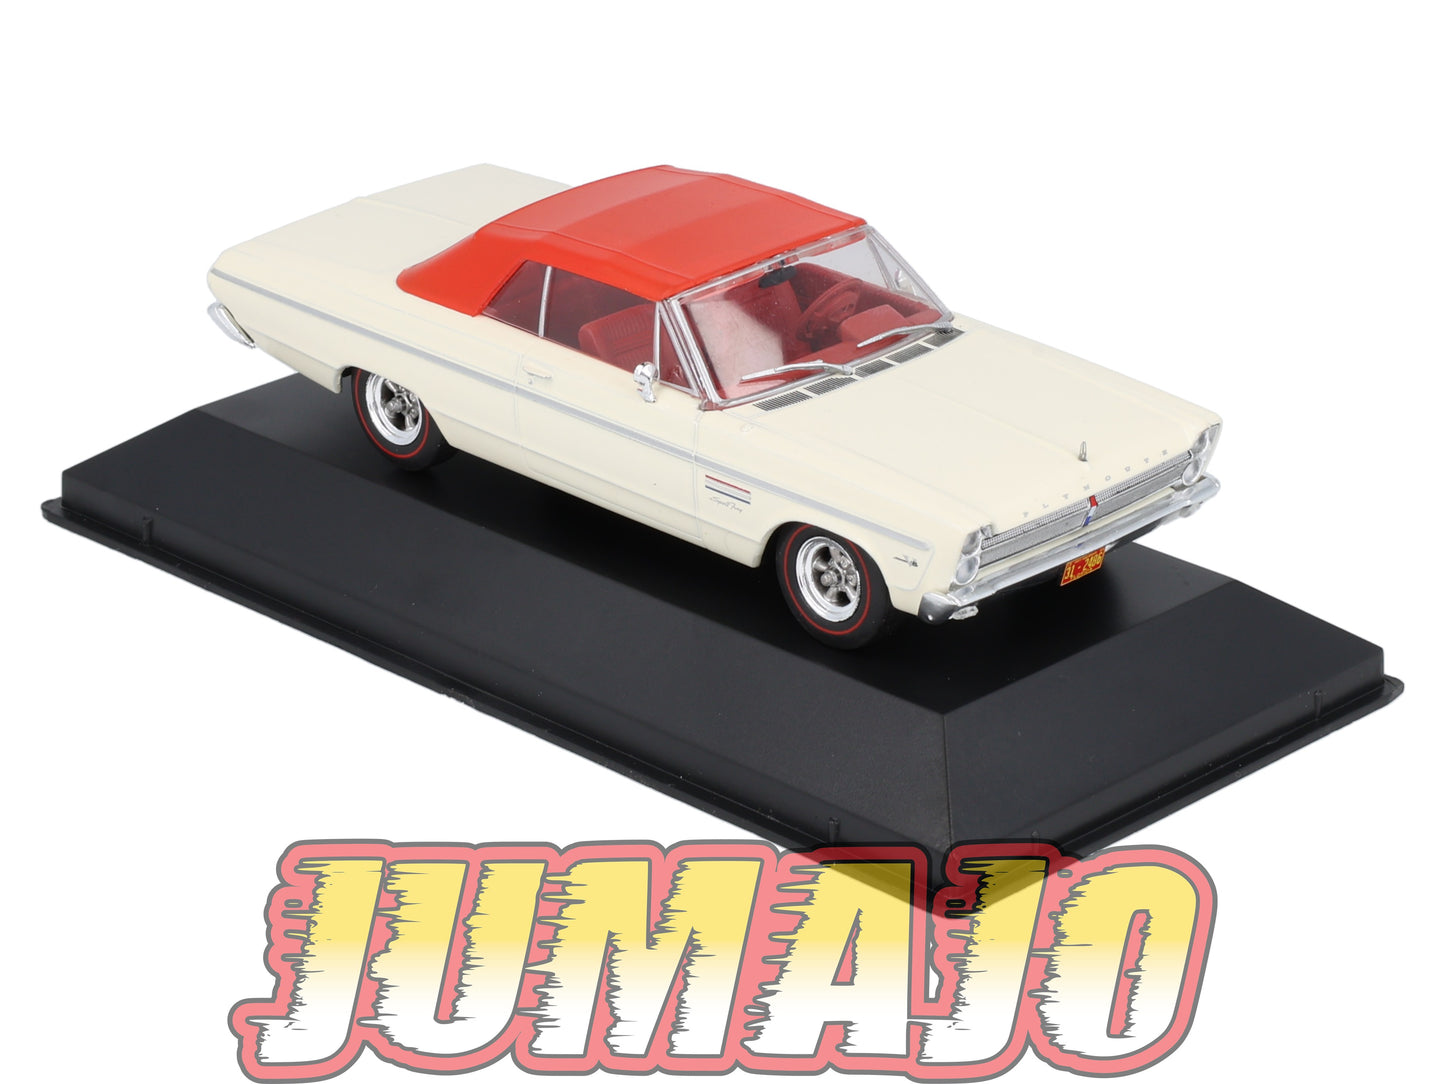 AC71 Voiture 1/43 IXO altaya Voitures américaines : PLYMOUTH Fury 426 Street Wedge 1965